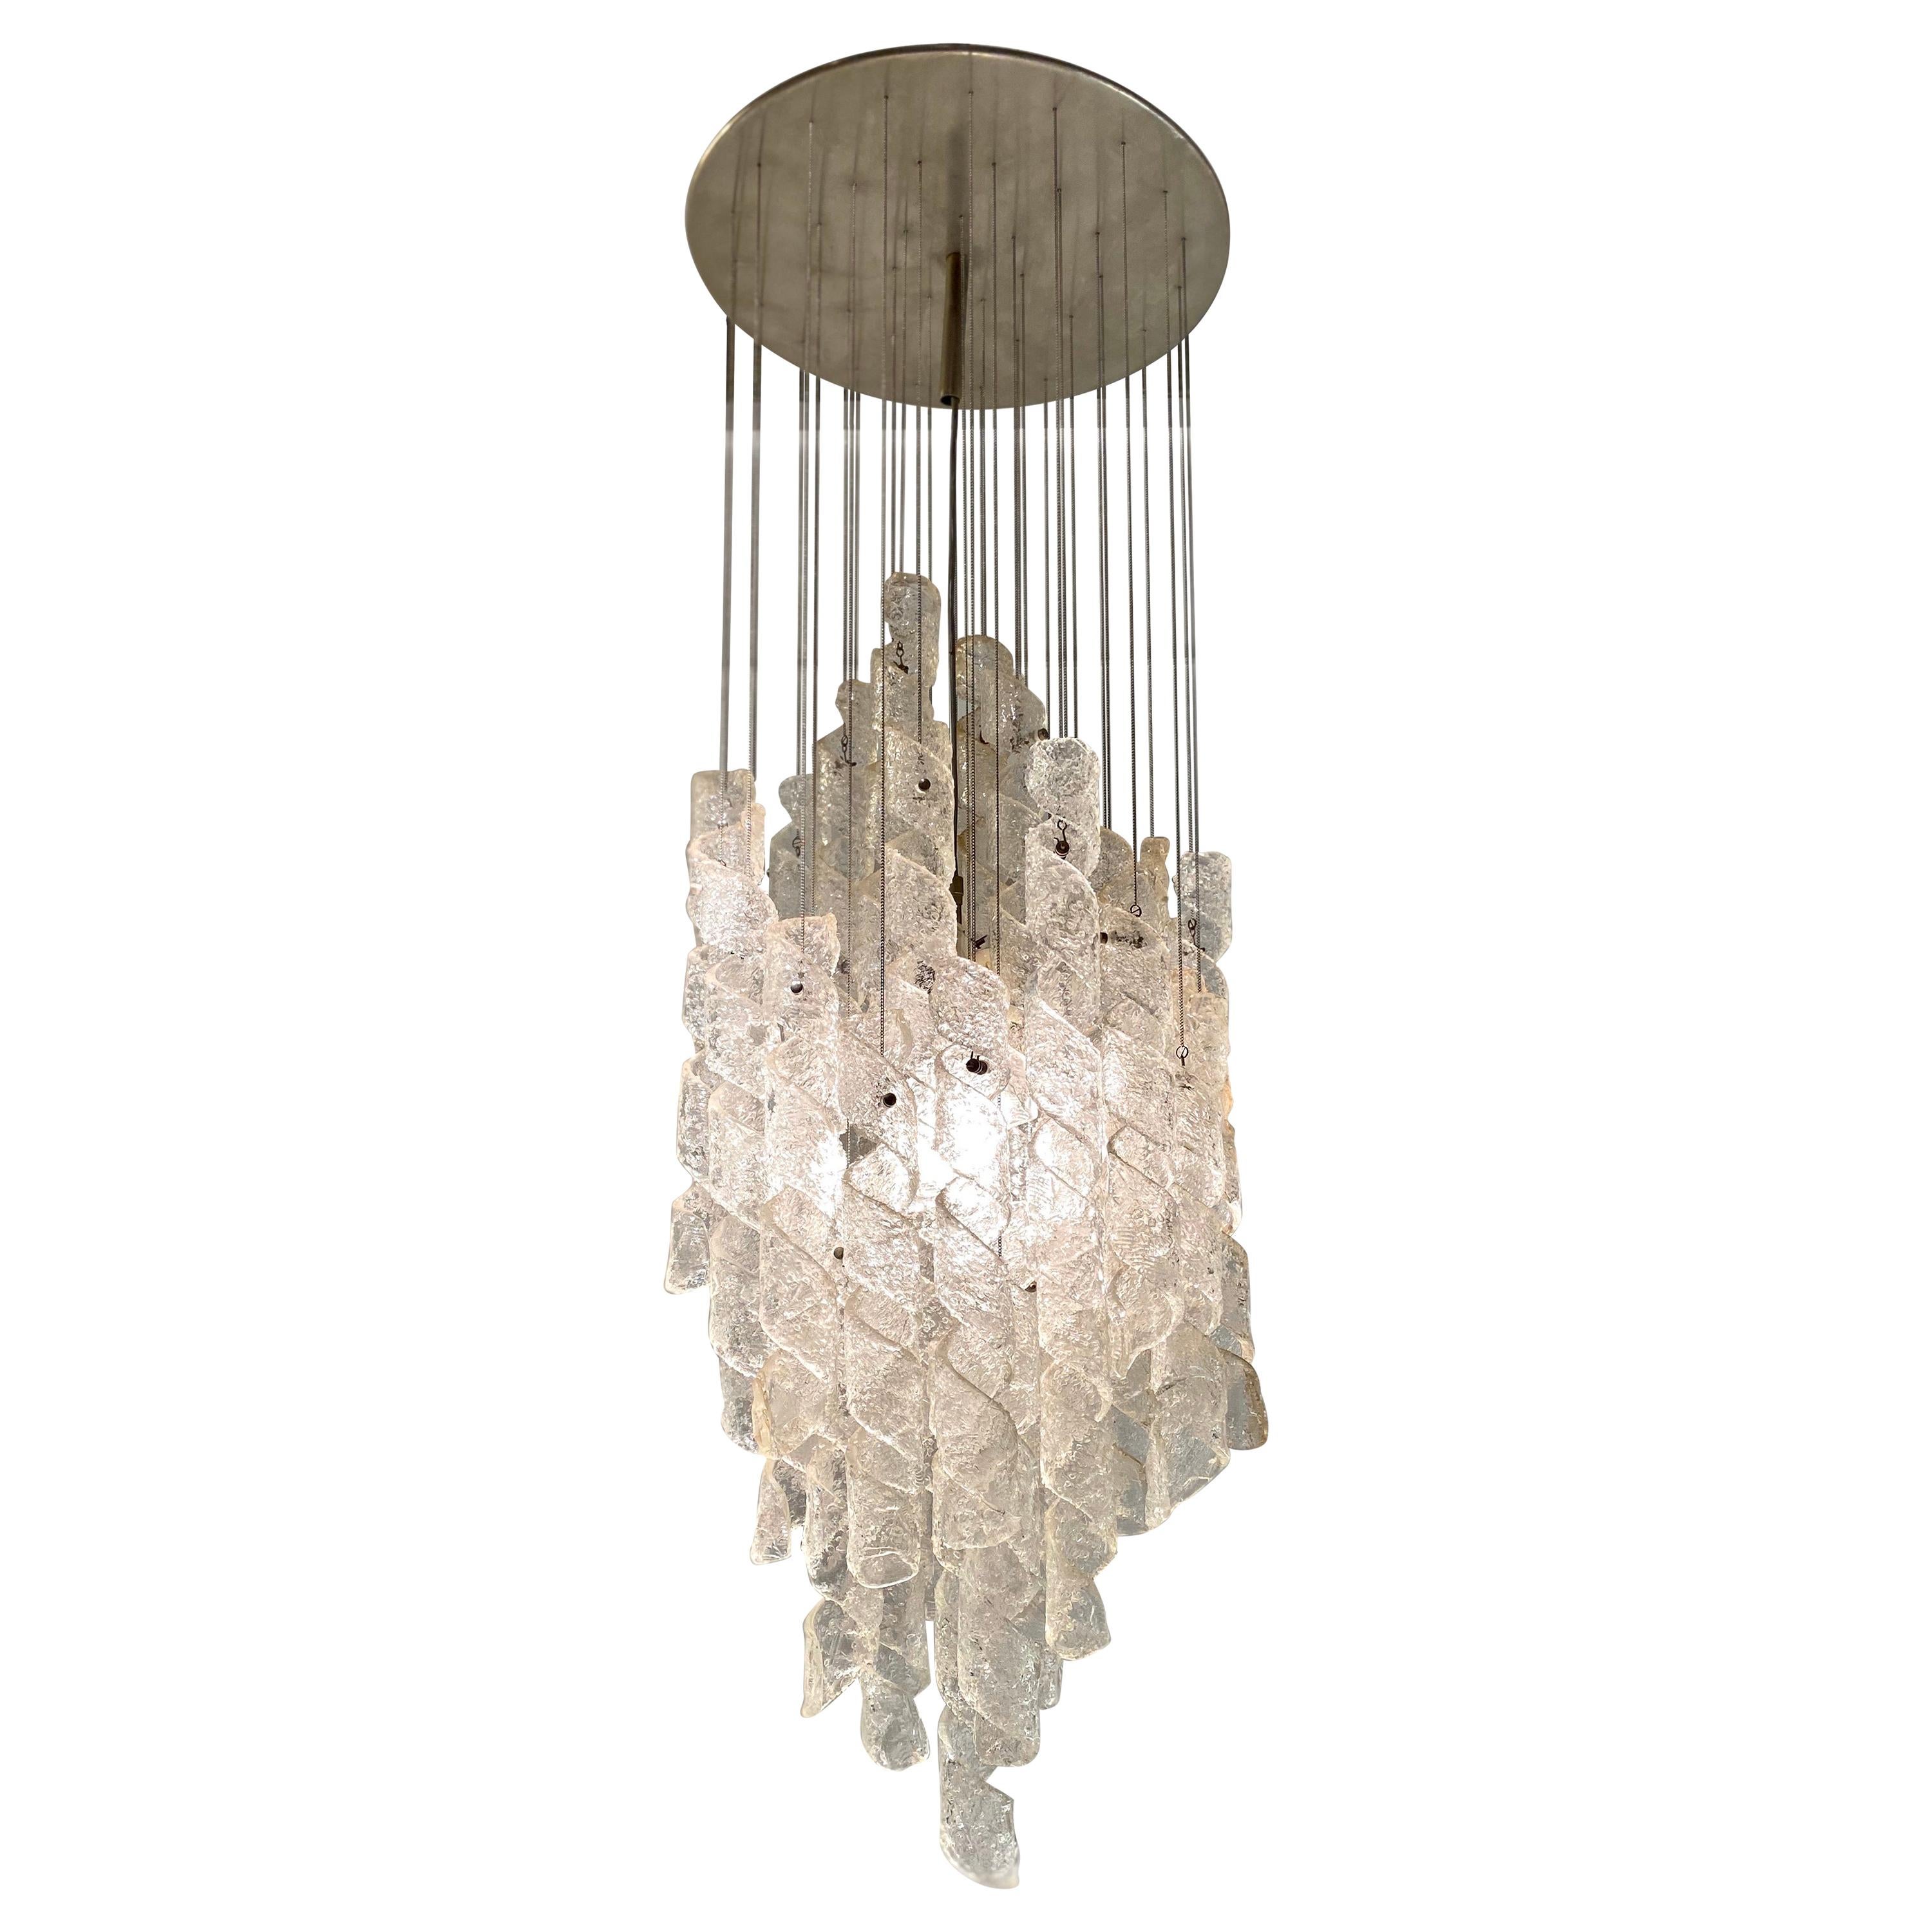 Mazzega Ceiling Chandelier "Torciglione", 1970s For Sale